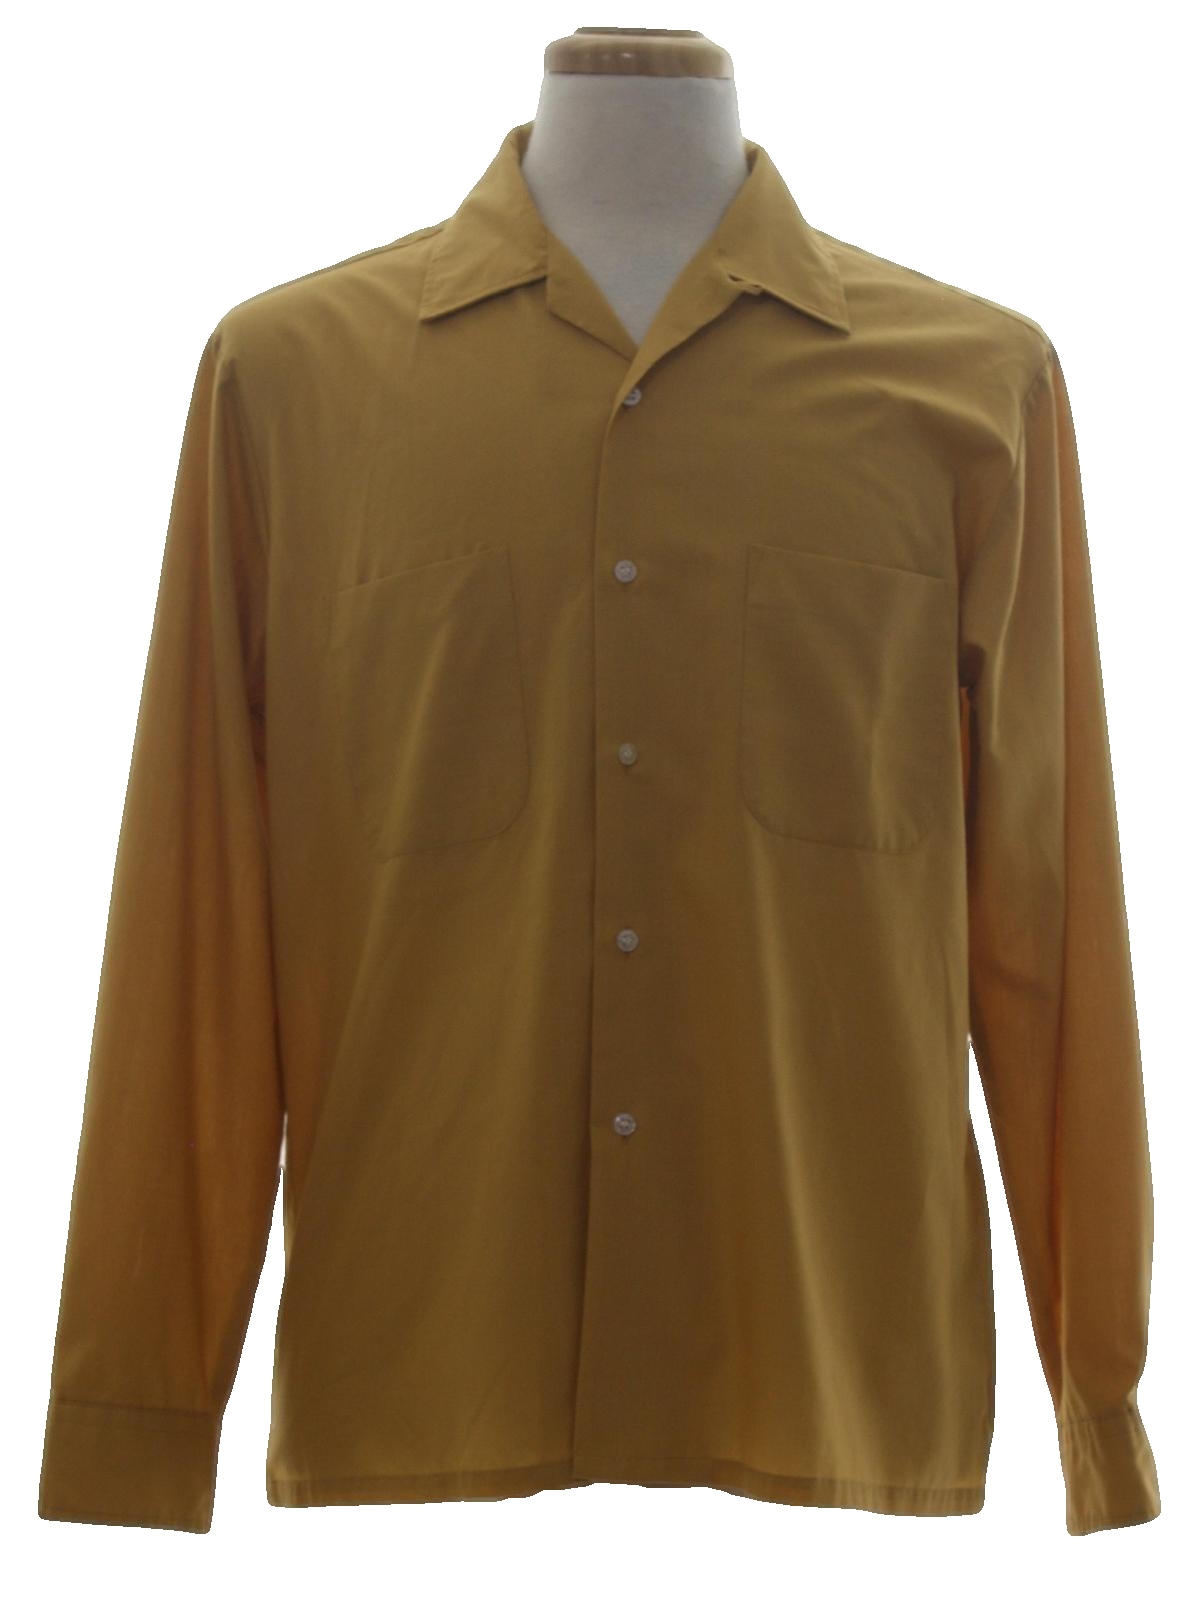 1960s Vintage Shirt: Late 60s or early 70s -Towncraft- Mens harvest ...